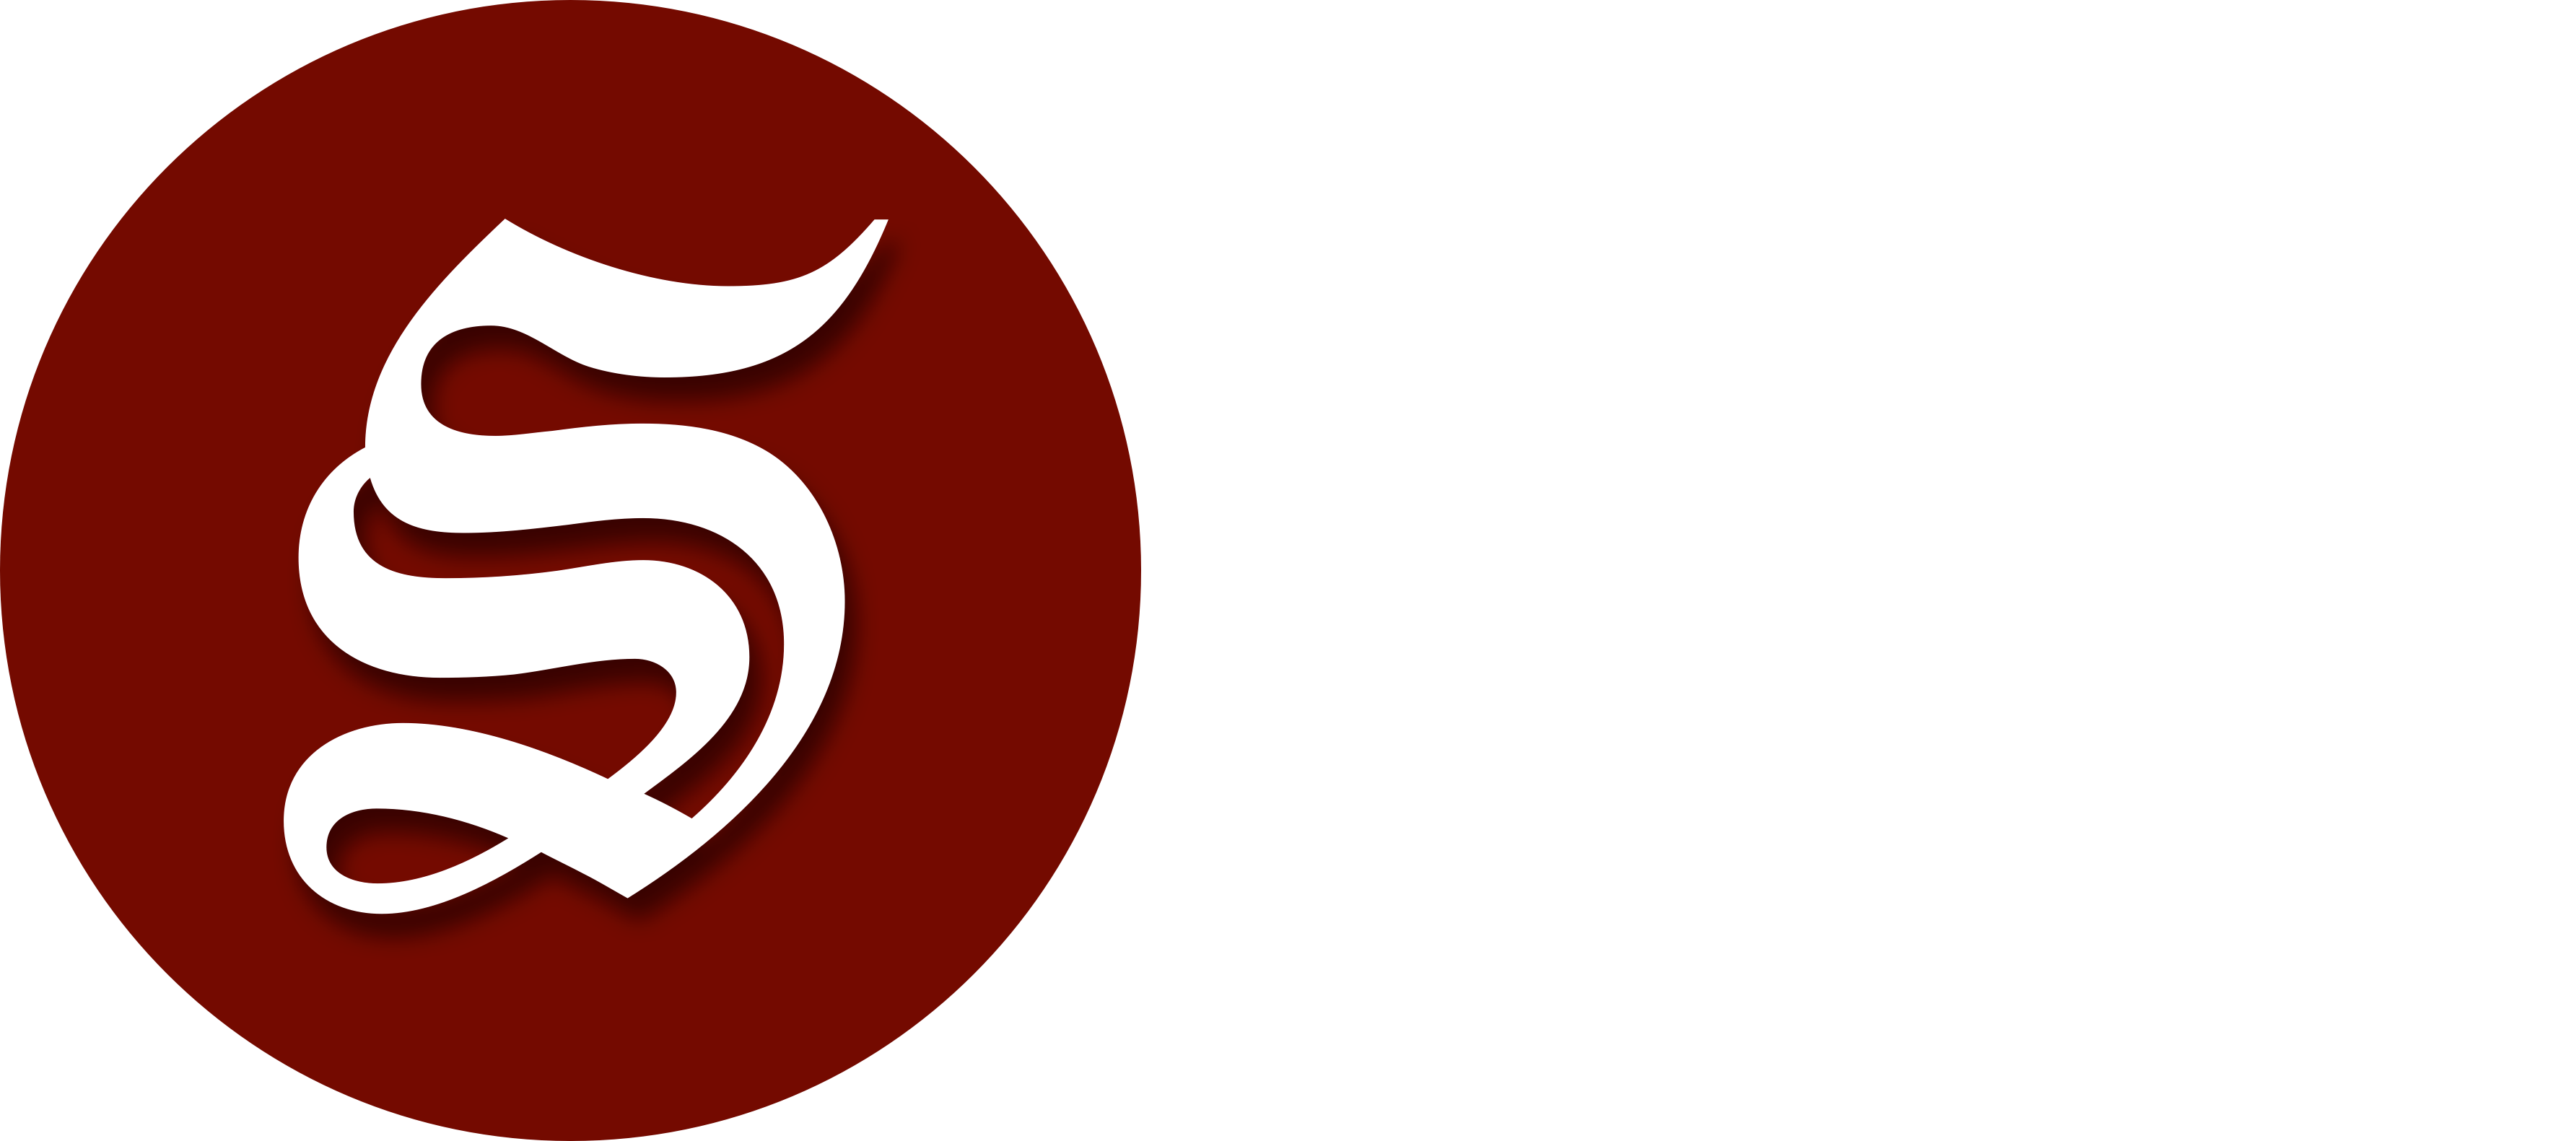 White with Red S Logo - Sunspots – Brought to you by The Cornell Daily Sun